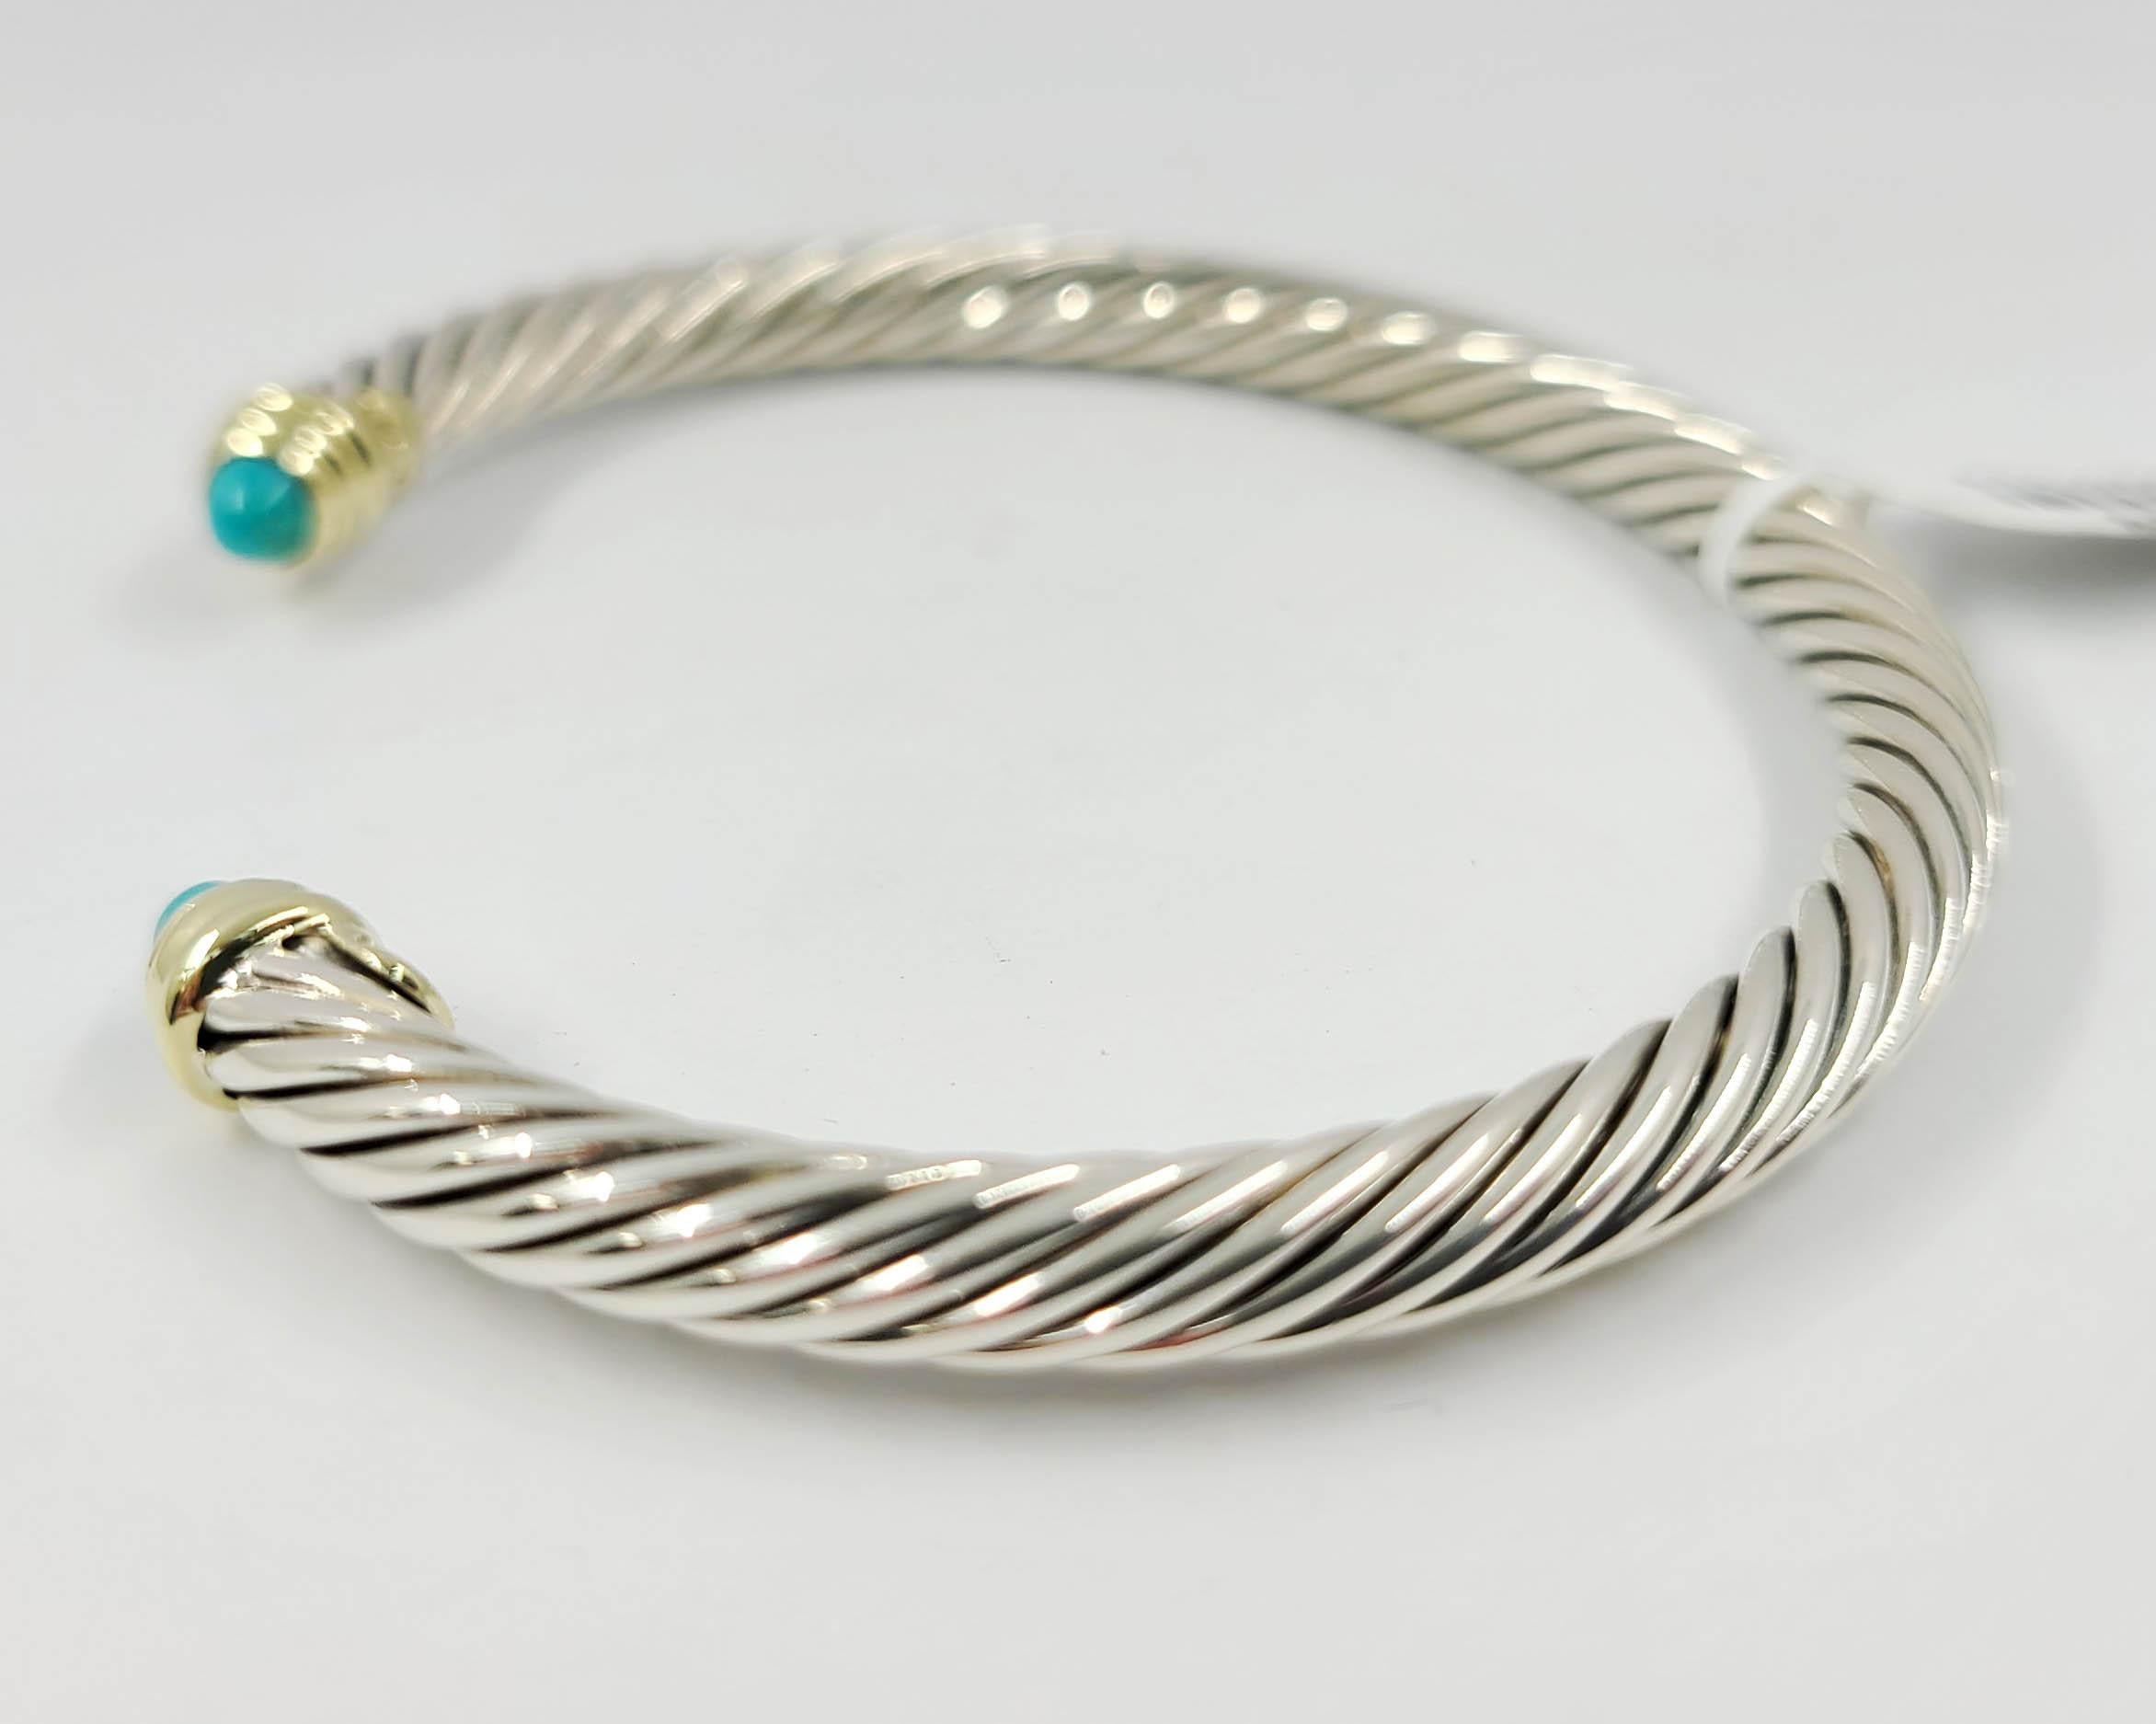 Estate David Yurman 5mm Cable Cuff in Sterling Silver with 14 Karat Yellow Gold Accents & Cabochon Turquoise End Caps. Original MSRP $650.